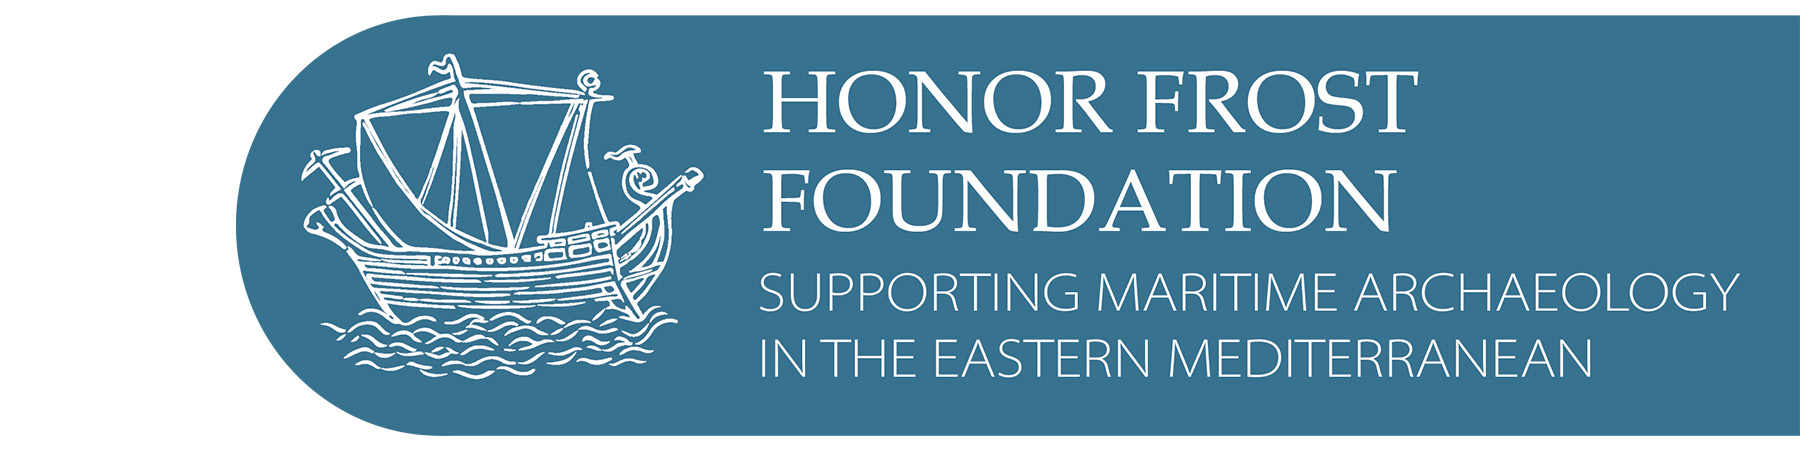 Honor Frost Foundation